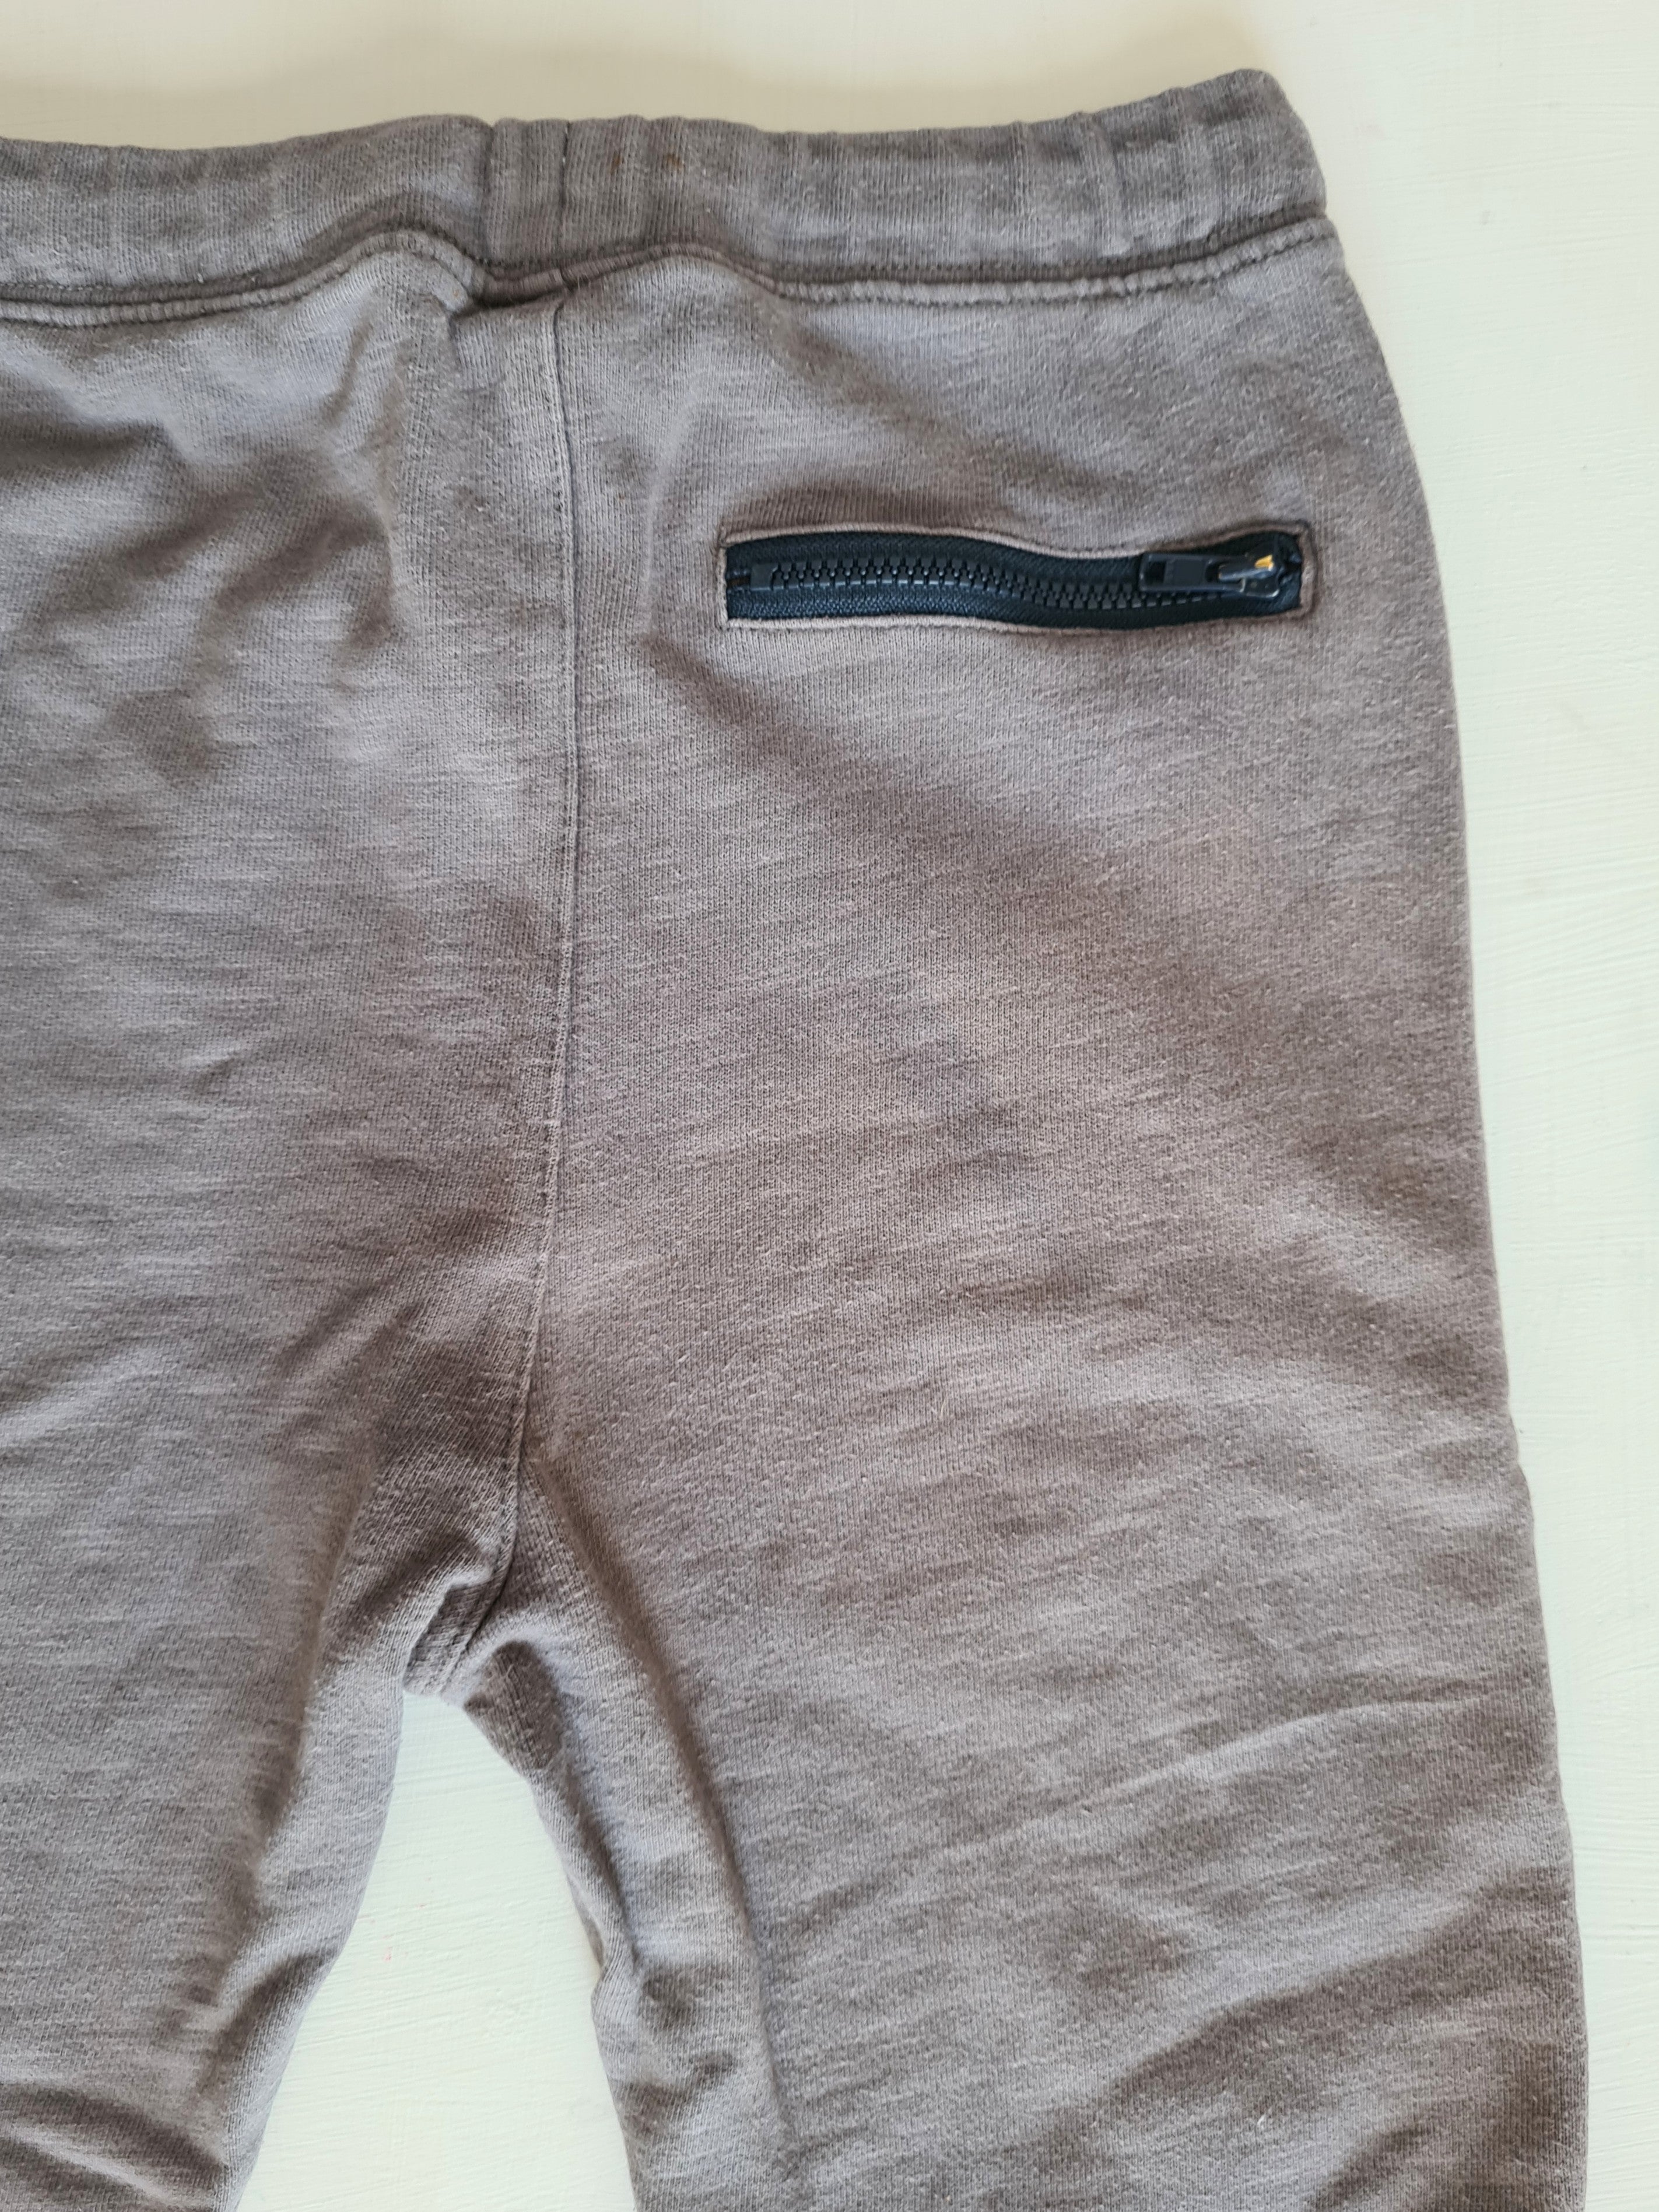 THRIFT Fred Bare - Grey and Blue trackpants Size 6